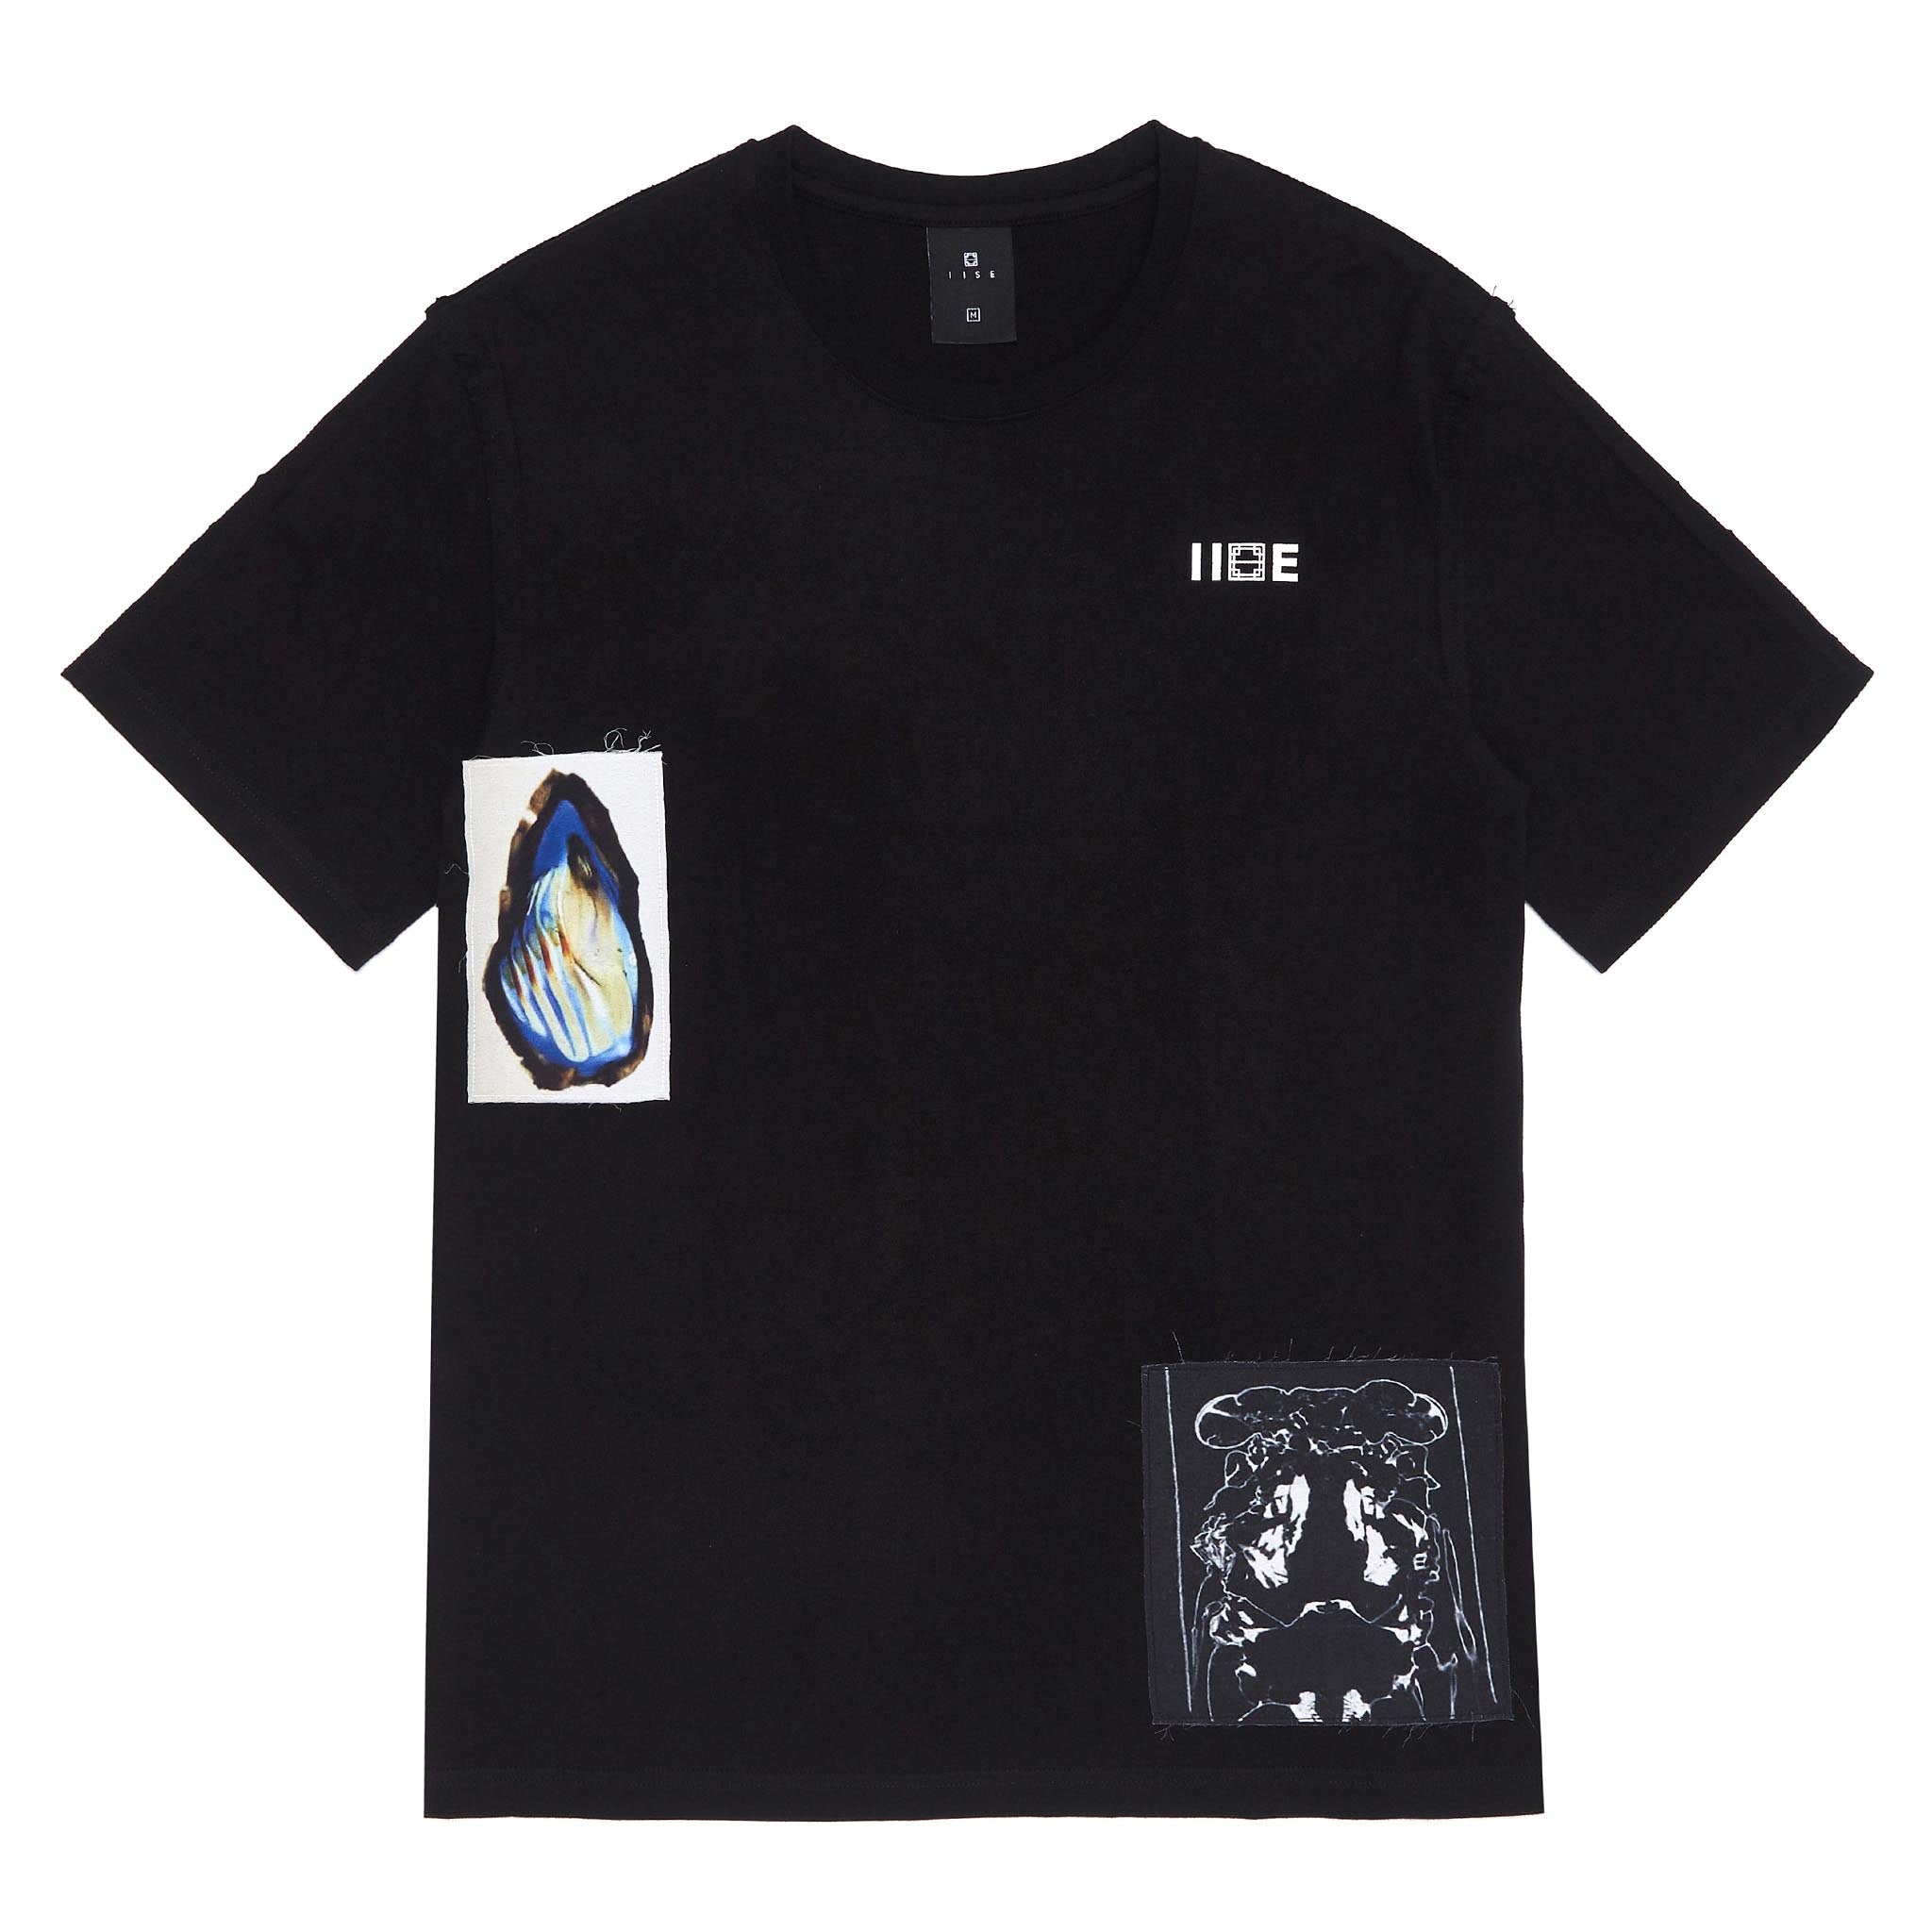 IISE Patch Tee Black